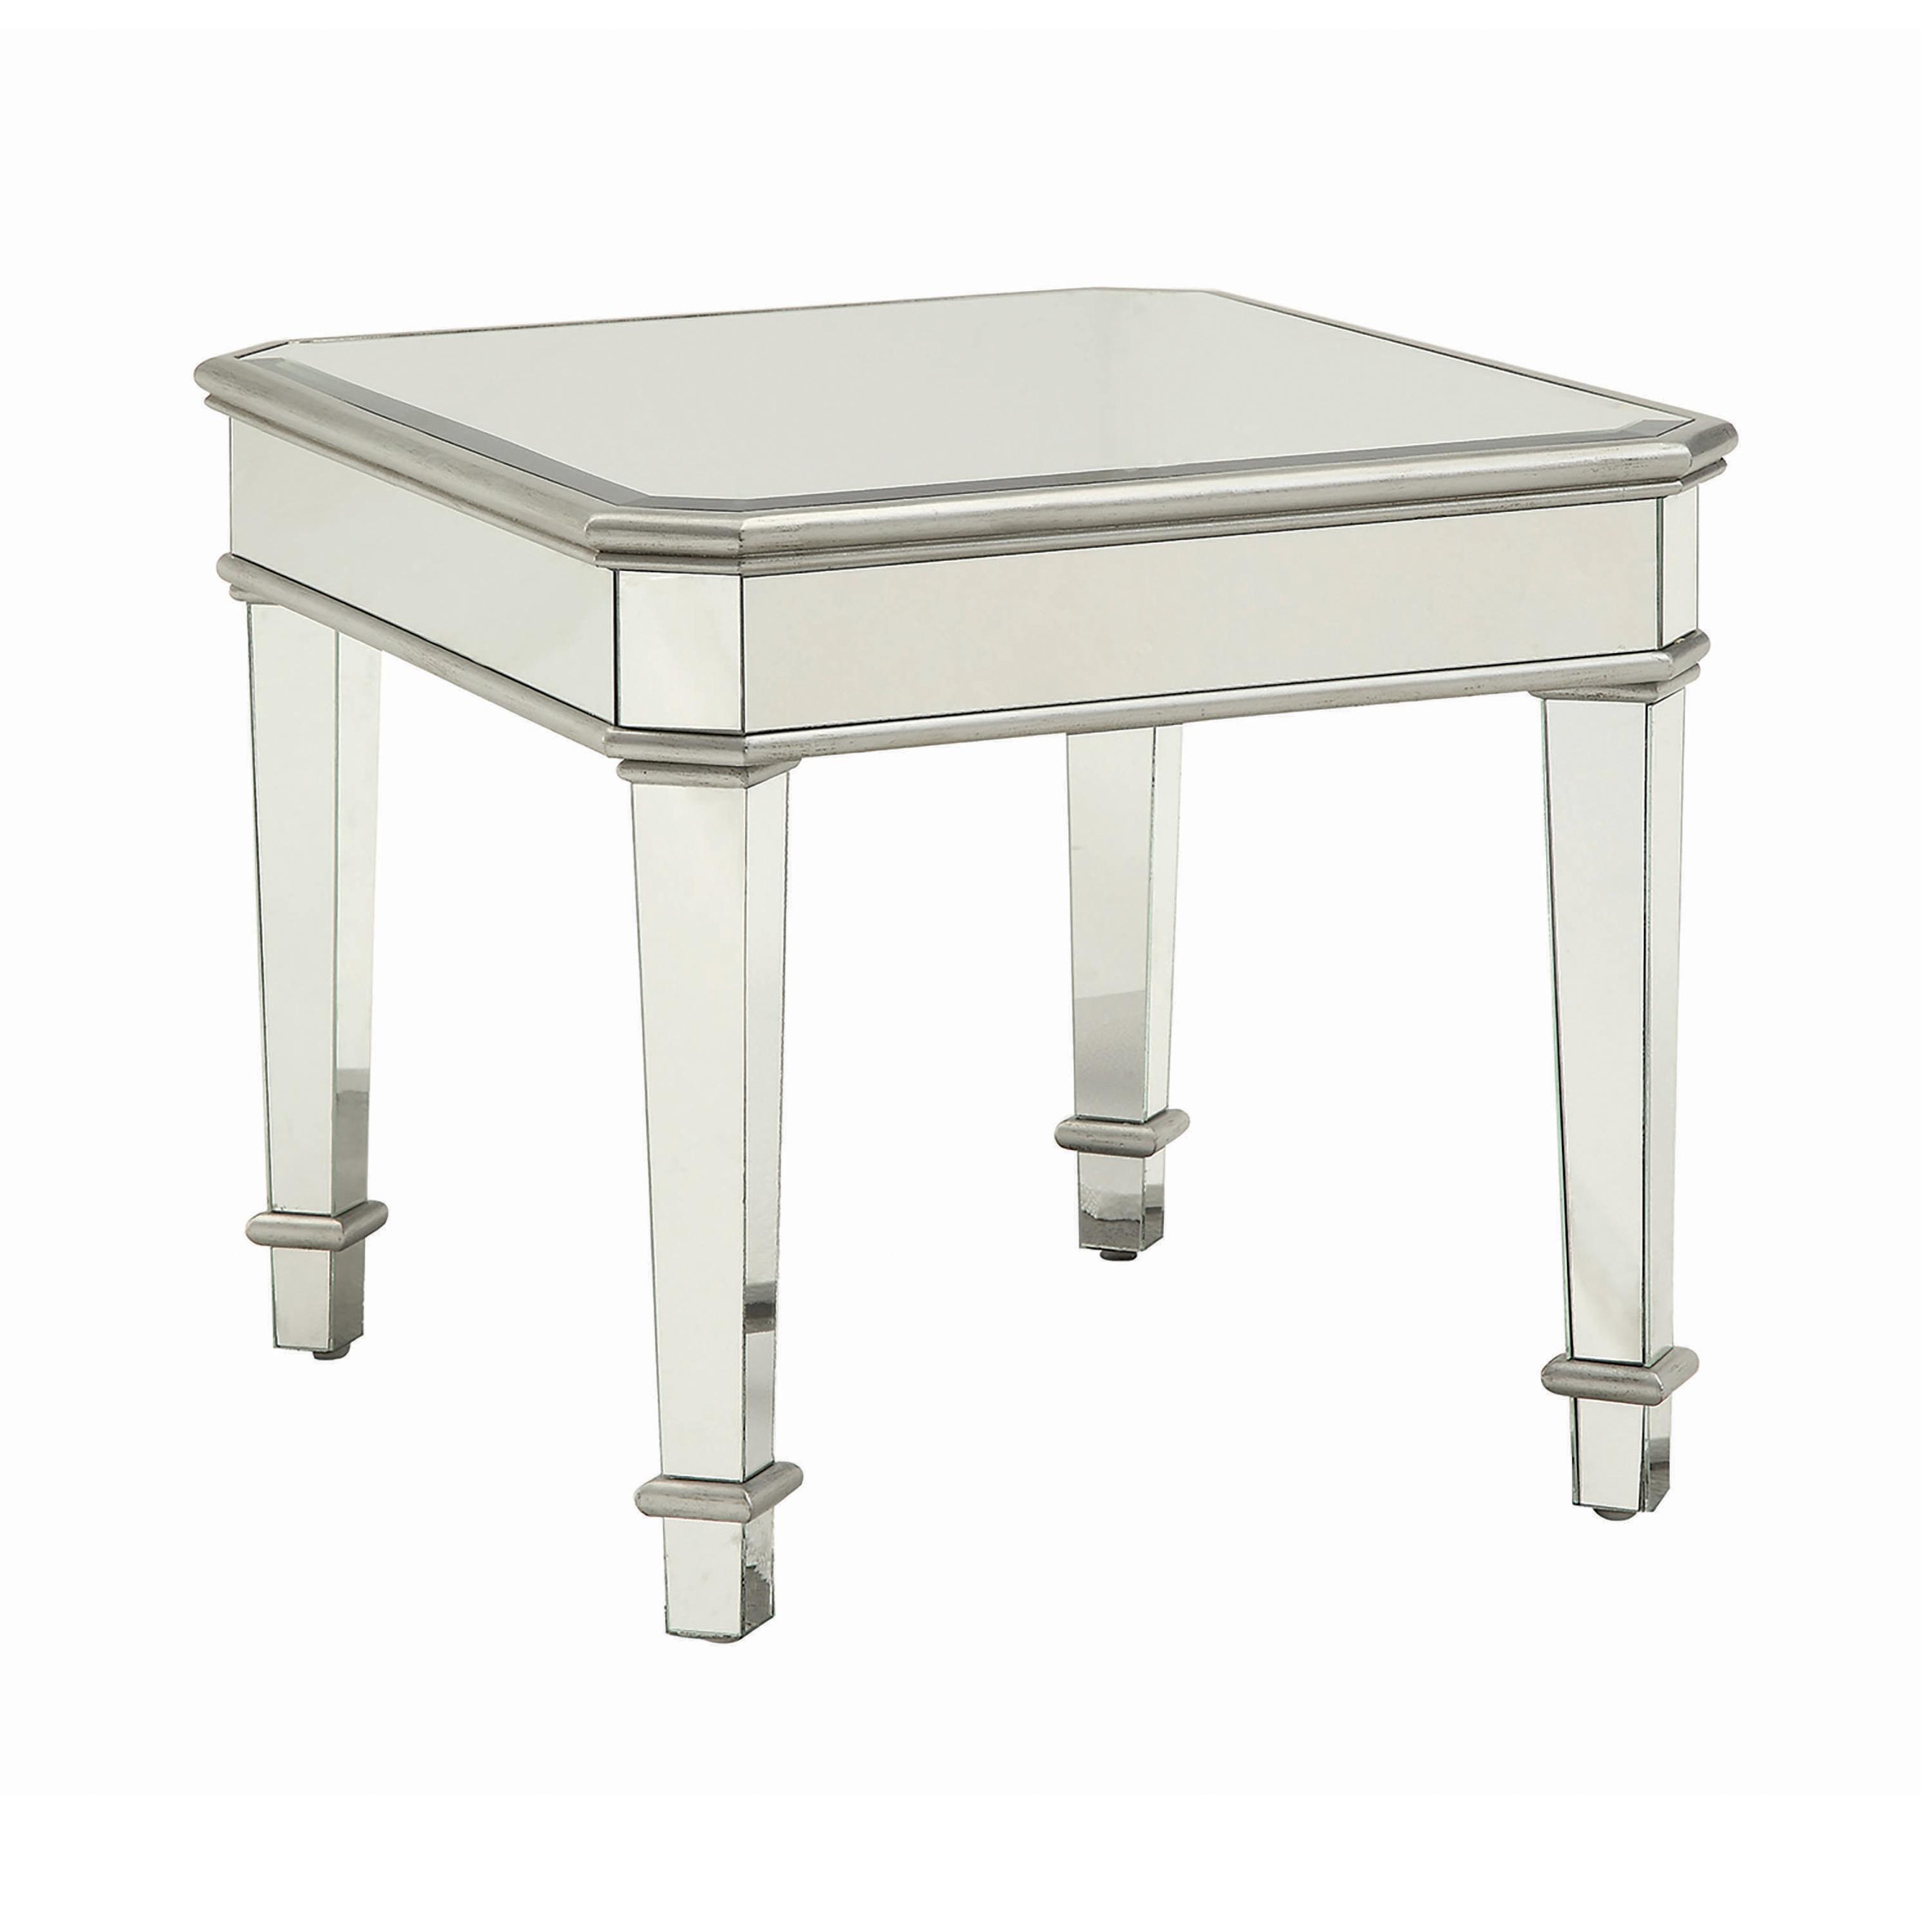 Contemporary End Table 703937 Cassandra 703937 in Silver 